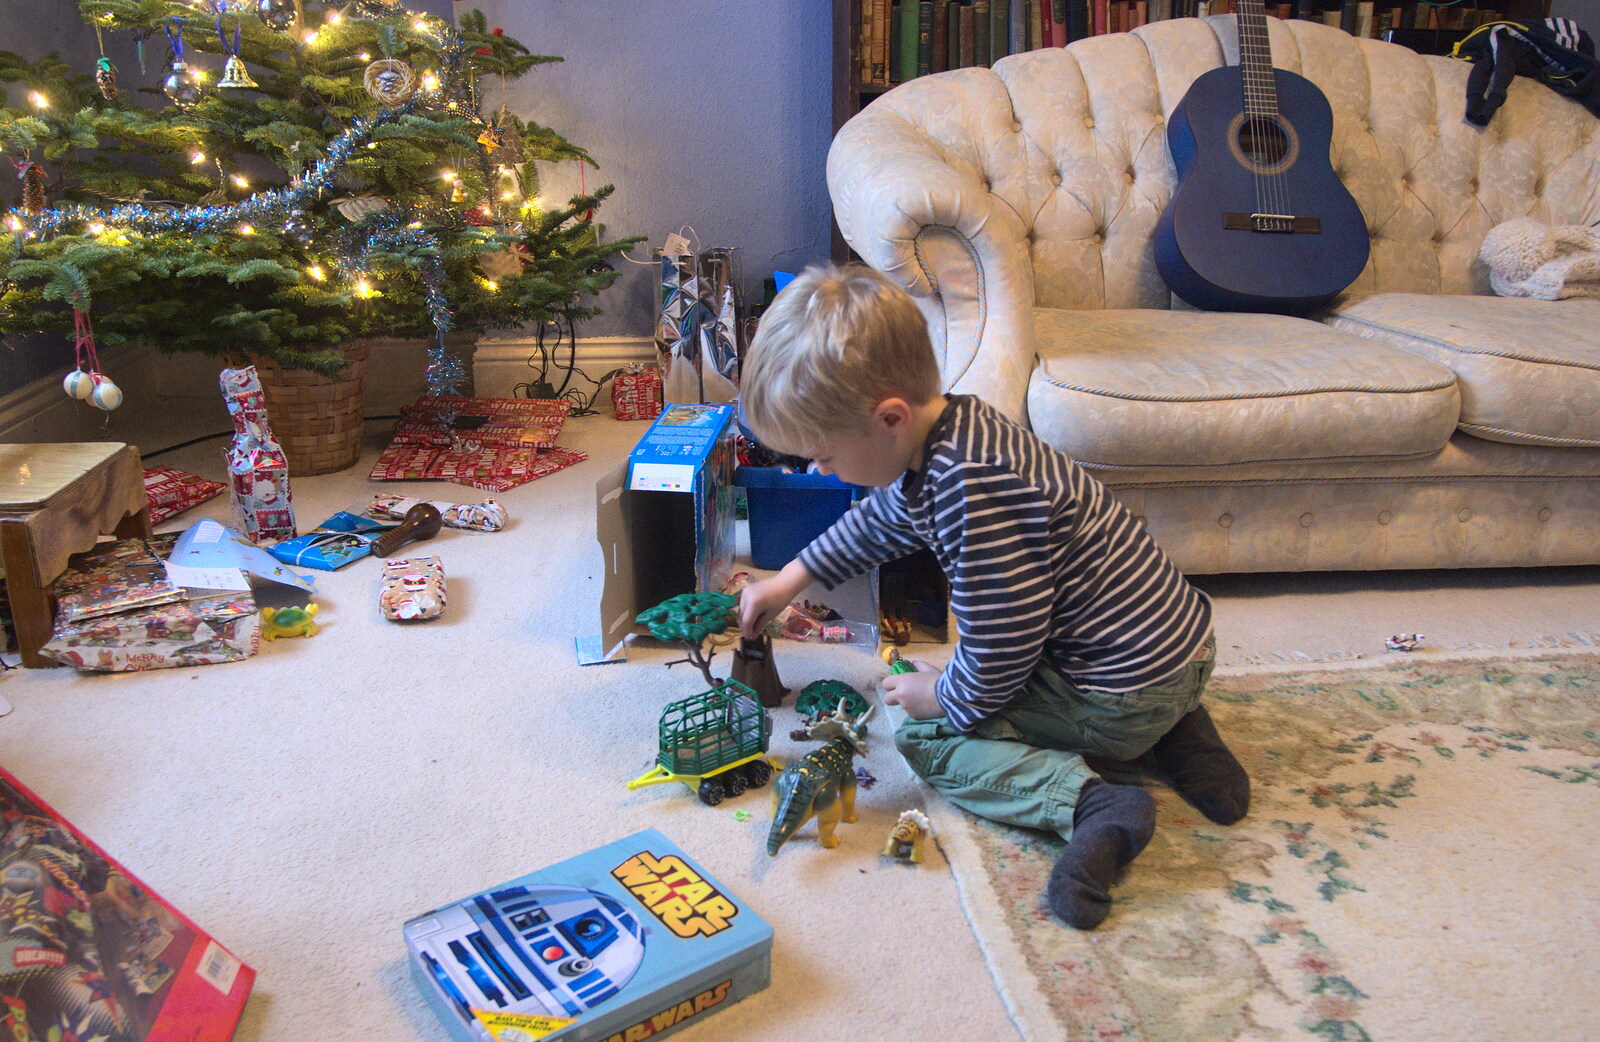 Harry plays with his Playmobil Jurassic Park from Christmas in Blackrock and St. Stephen's in Ballybrack, Dublin, Ireland - 25th December 2015